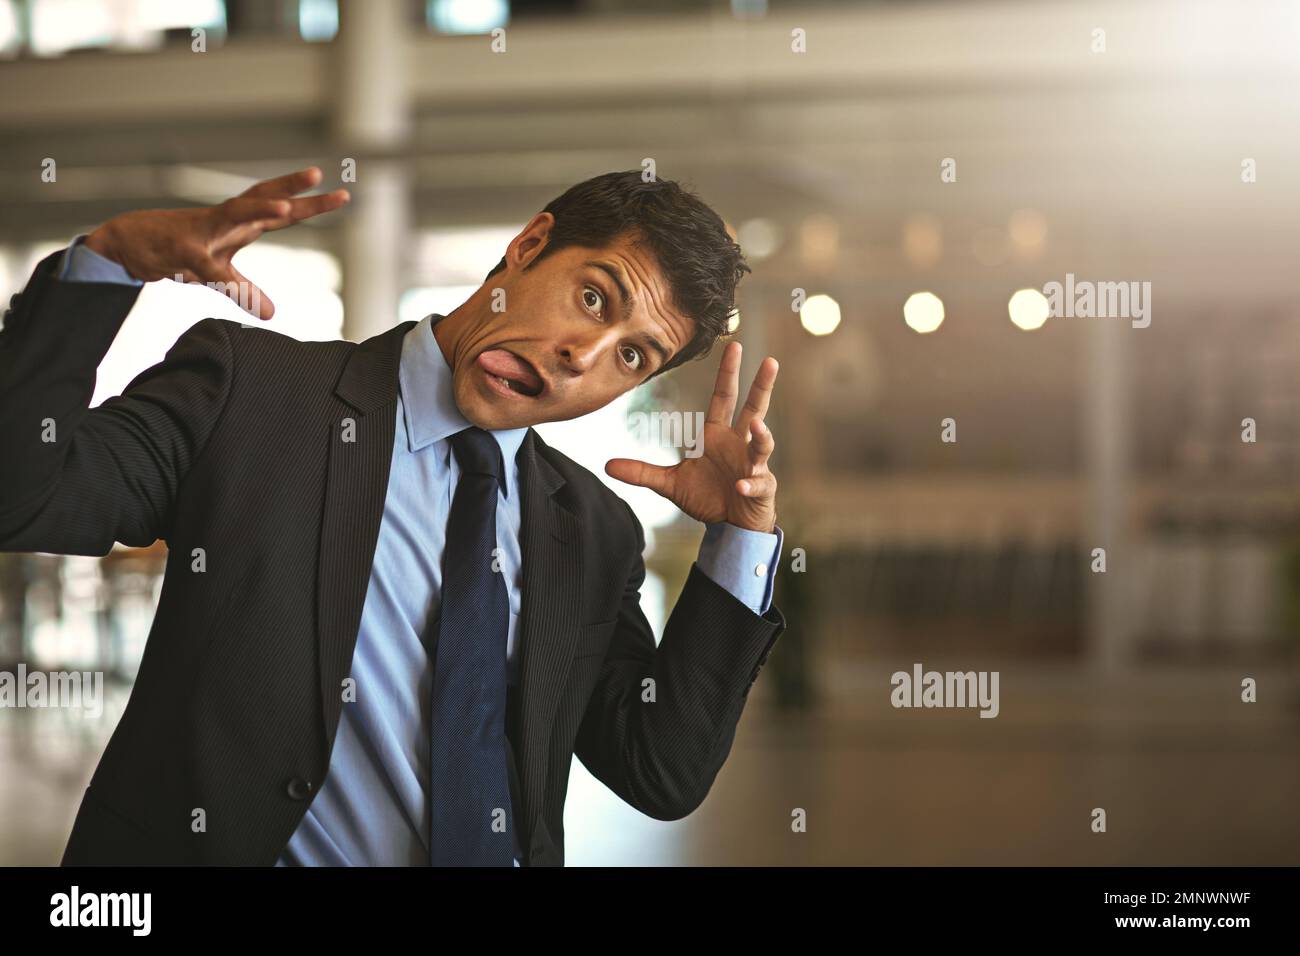 Business can get crazy. Cropped portrait of a businessman gesturing crazily in the office. Stock Photo